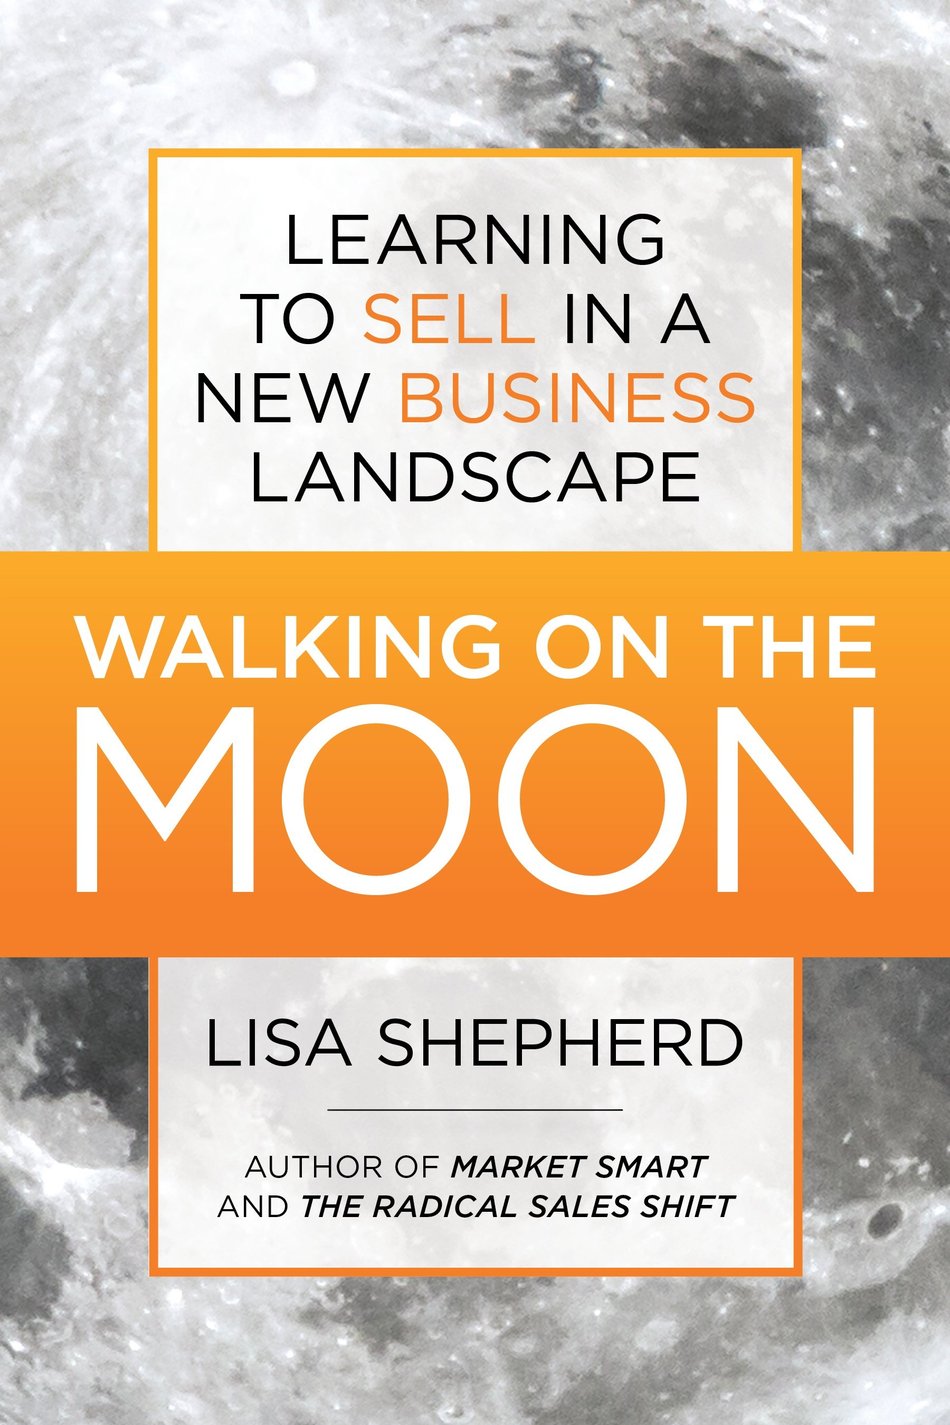 7 Questions about B2B Marketing Book 'Walking on the Moon'